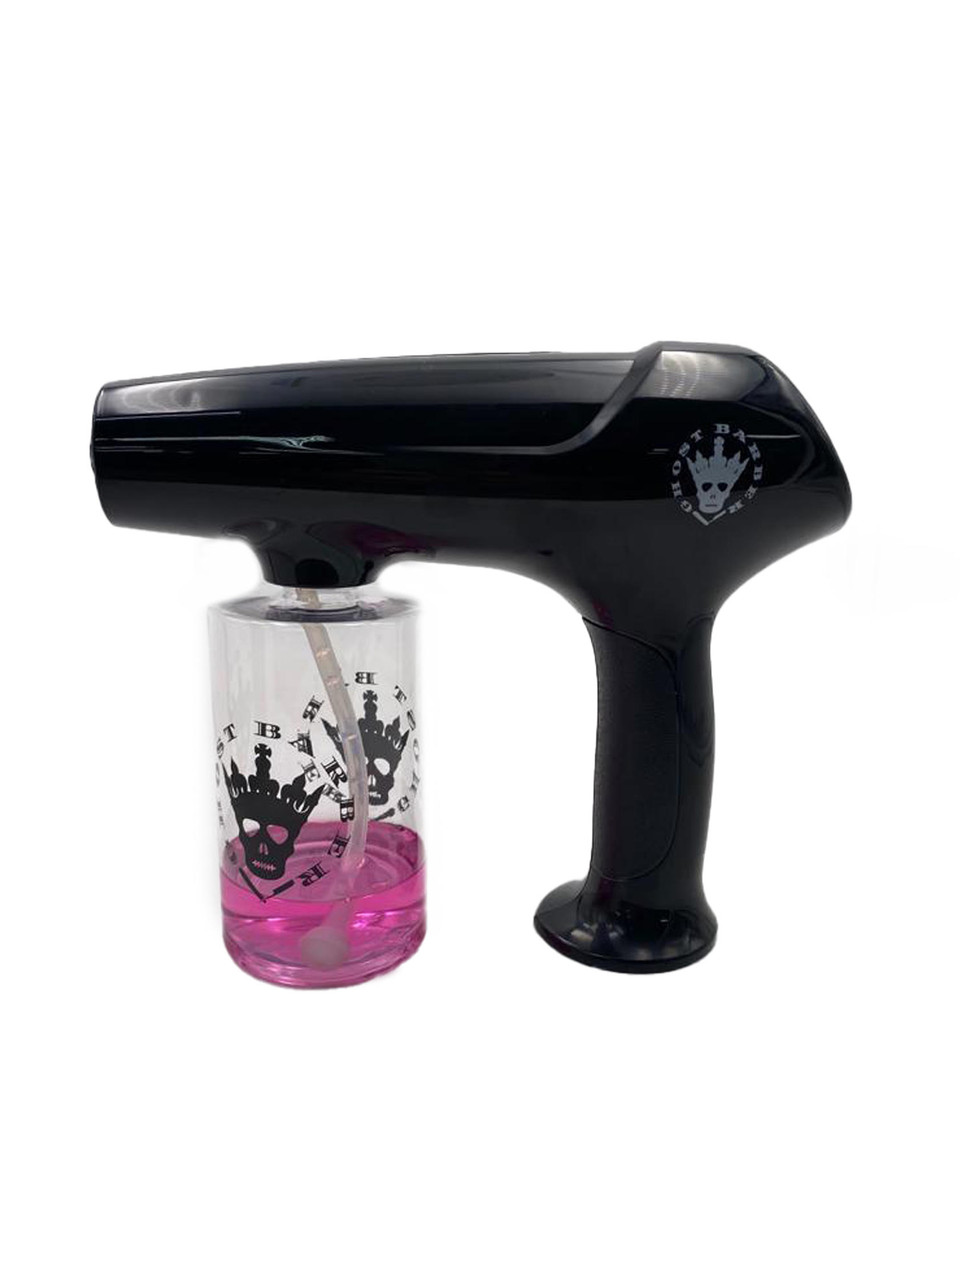 Premium Photo  The barber spray gun is located on a black marble